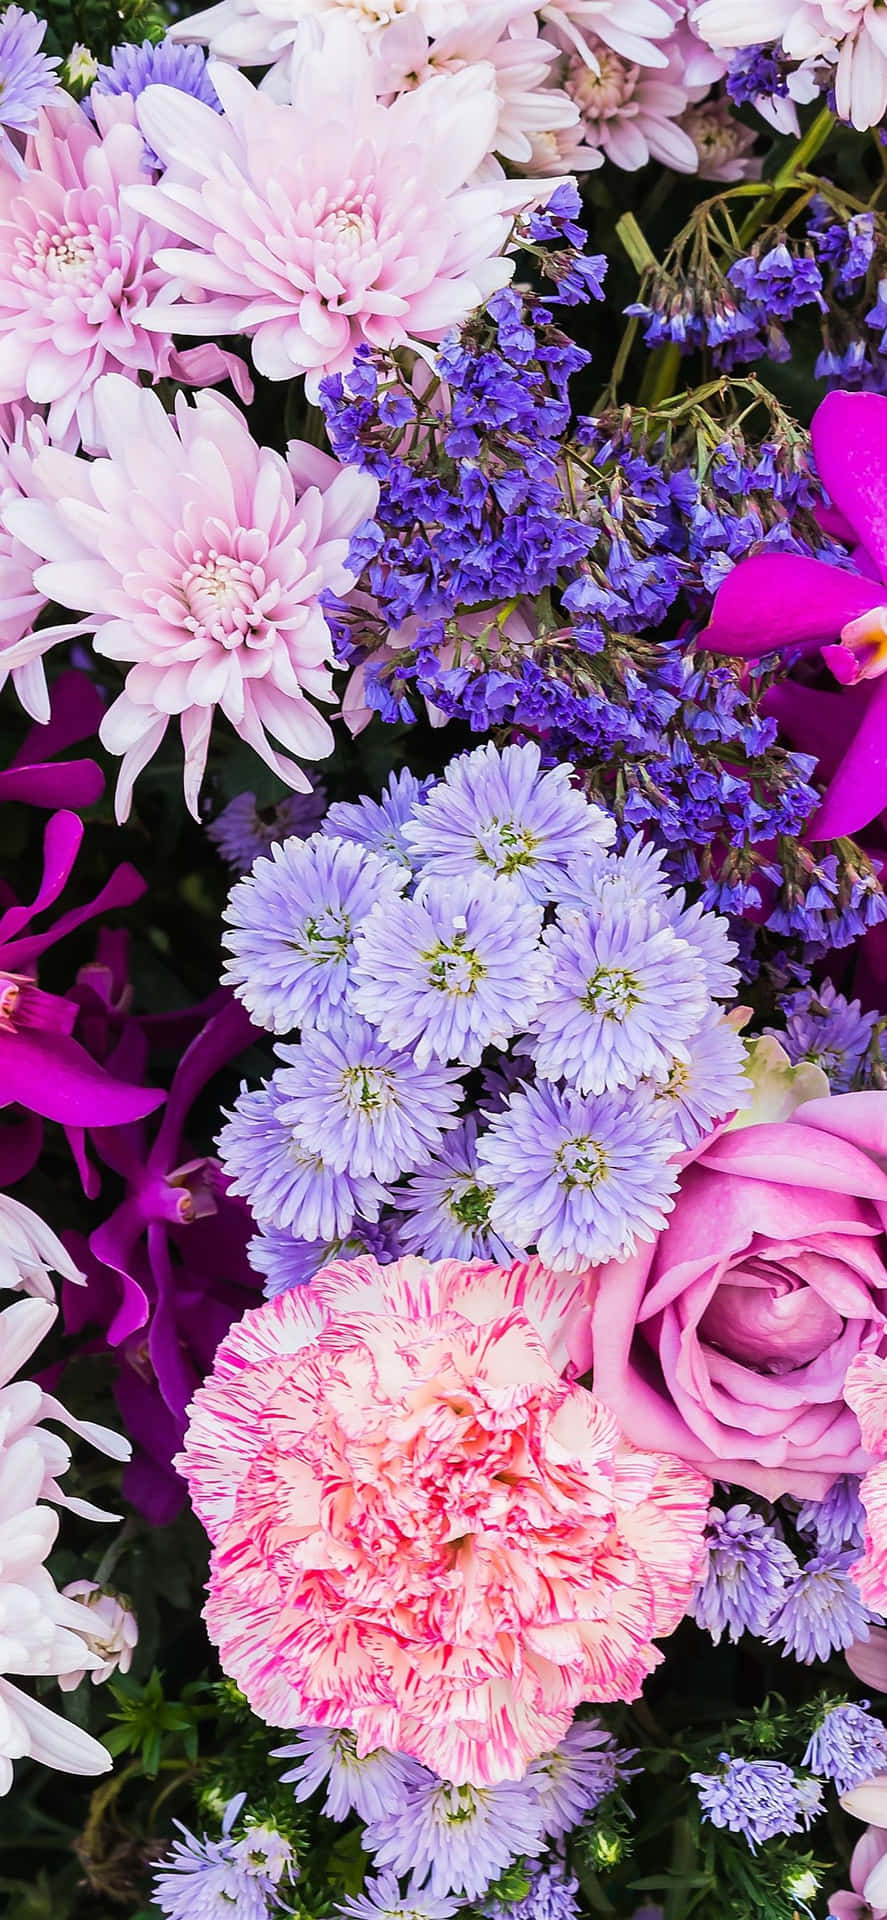 Feel the blooming beauty of this colorful flower iPhone wallpaper. Wallpaper